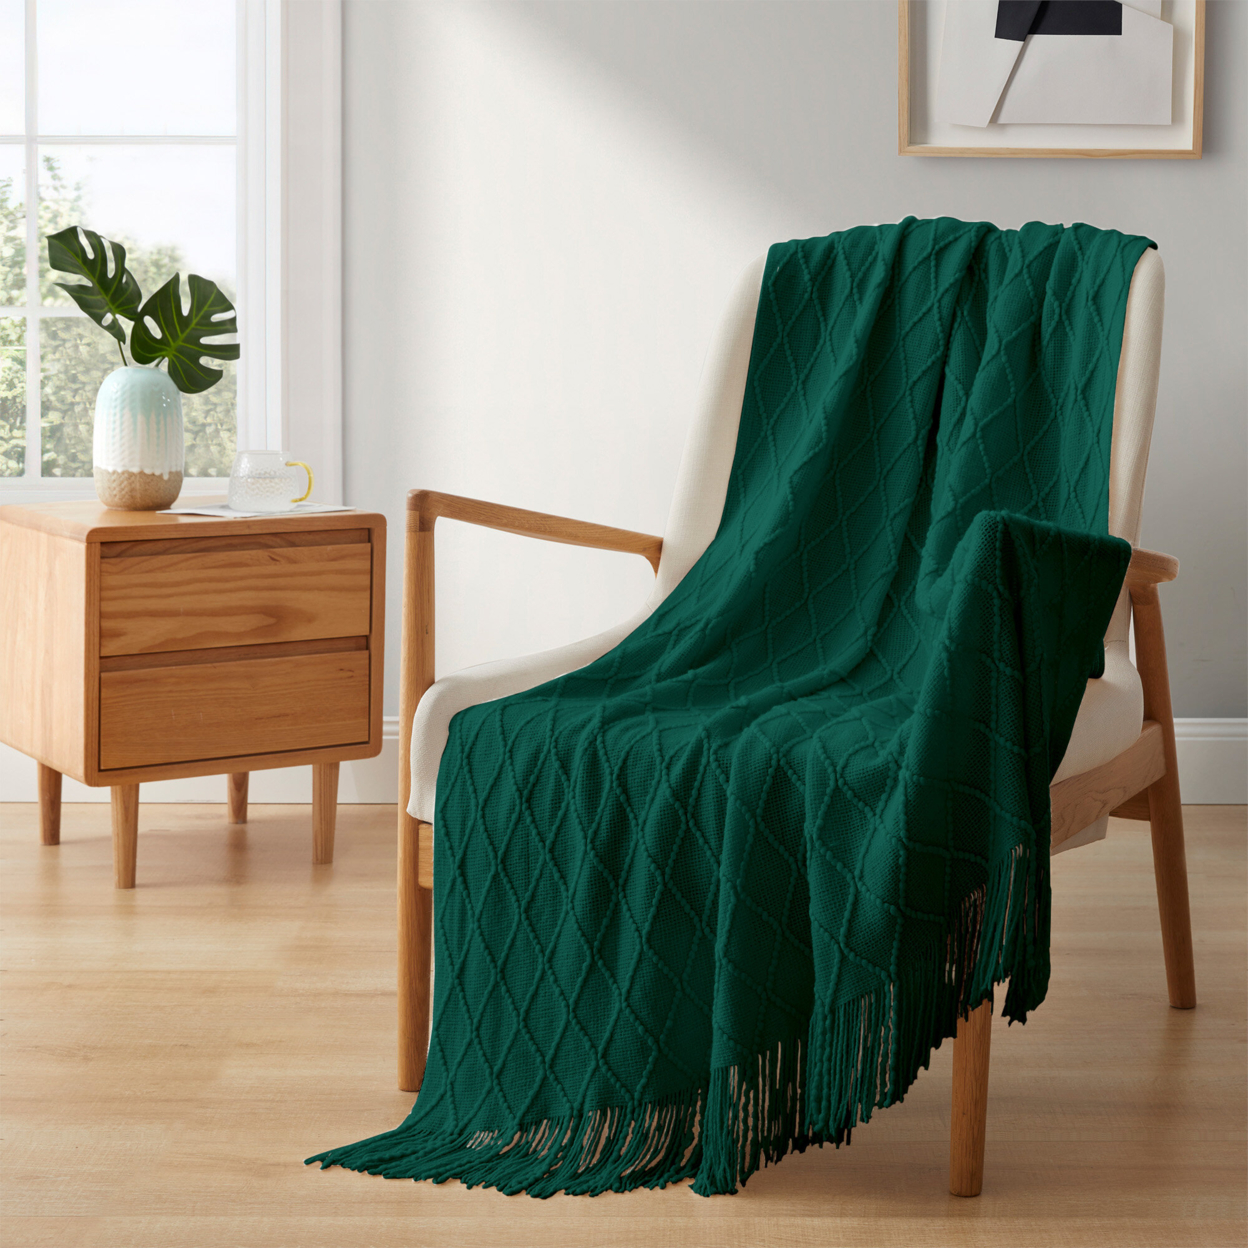 Ultra Soft Diamond Knit Throw Blanket 50x60-Perfect For Year-round Comfort - Green, 50 In X 60 In